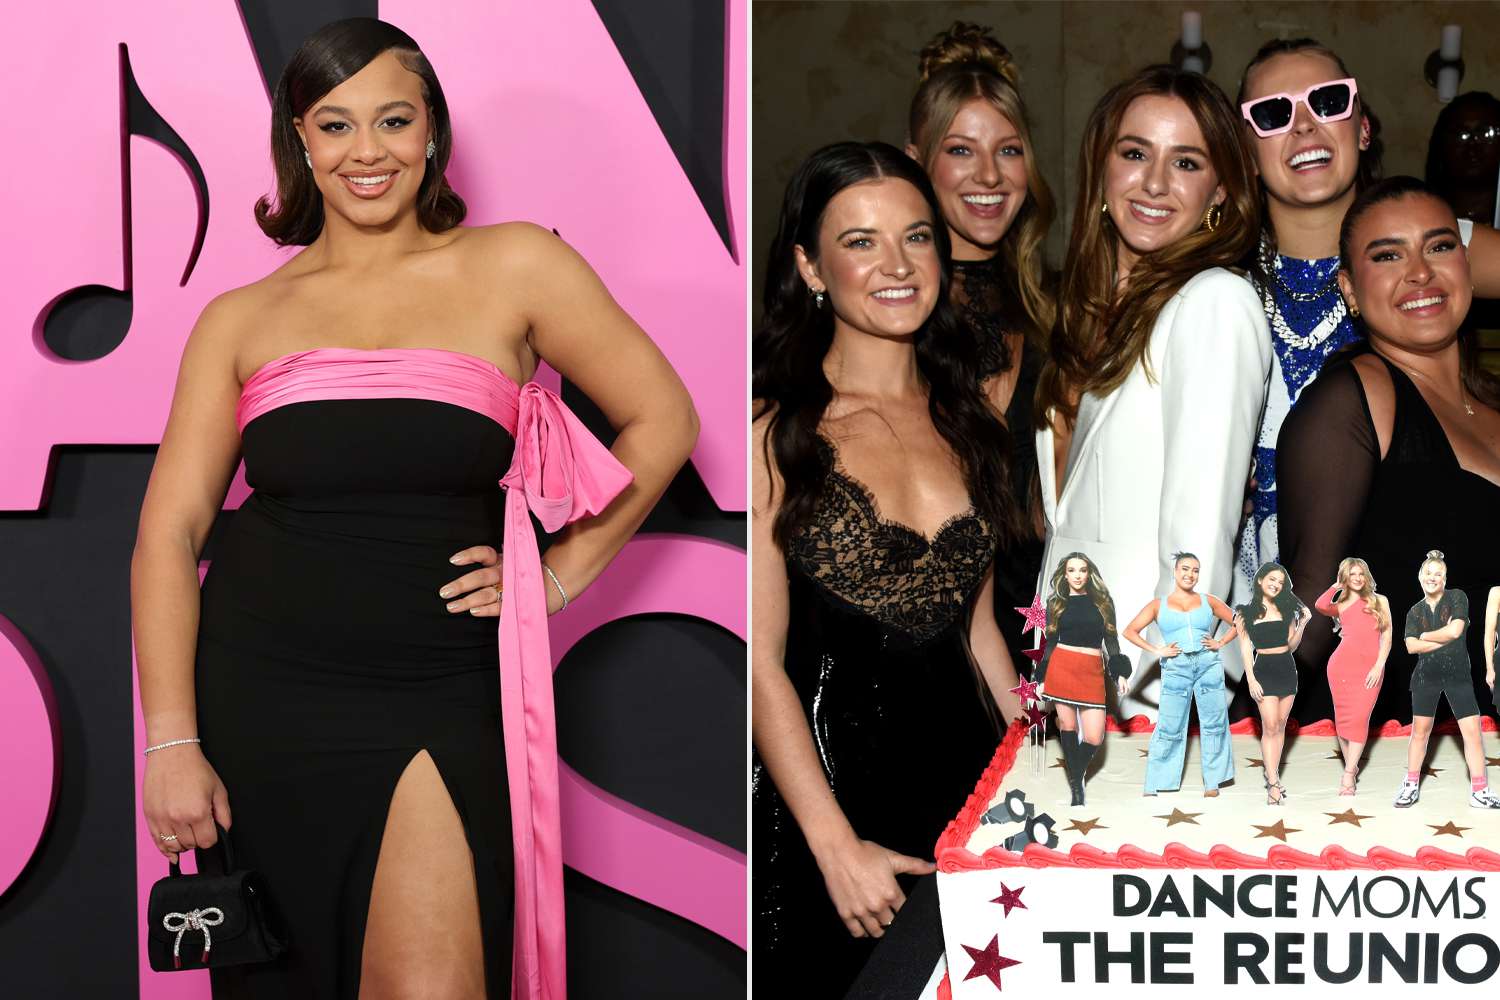 Nia Sioux Reveals Why She Skipped ‘Dance Moms: The Reunion’: ‘I Just Didn’t Want to Start Drama’